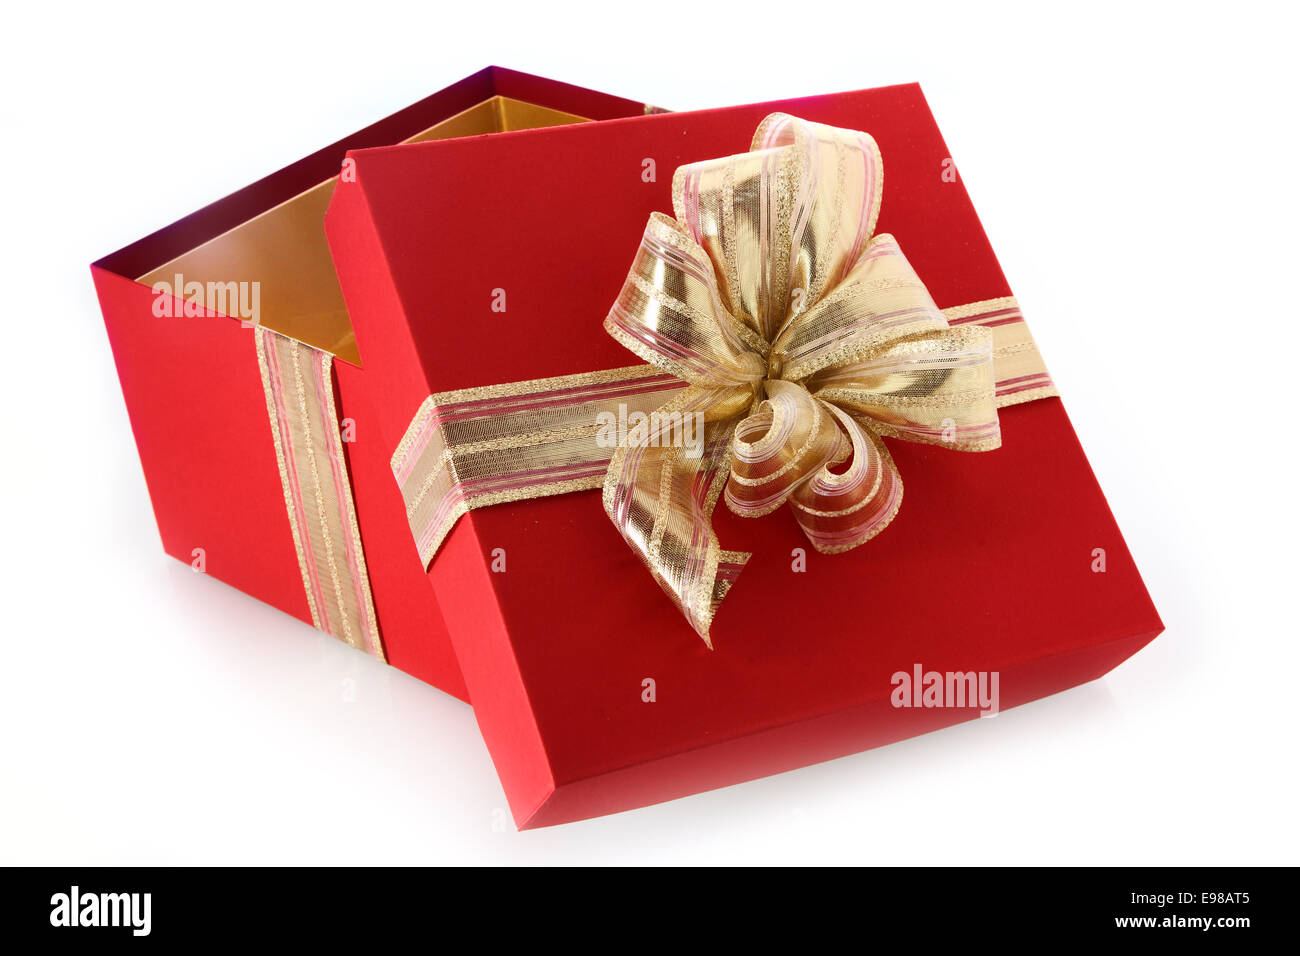 Open gift box with tilted lid and decorative gold ribbon and bow for celebrating Christmas, Valentines, birthday or an anniversary, close up view on a white background Stock Photo